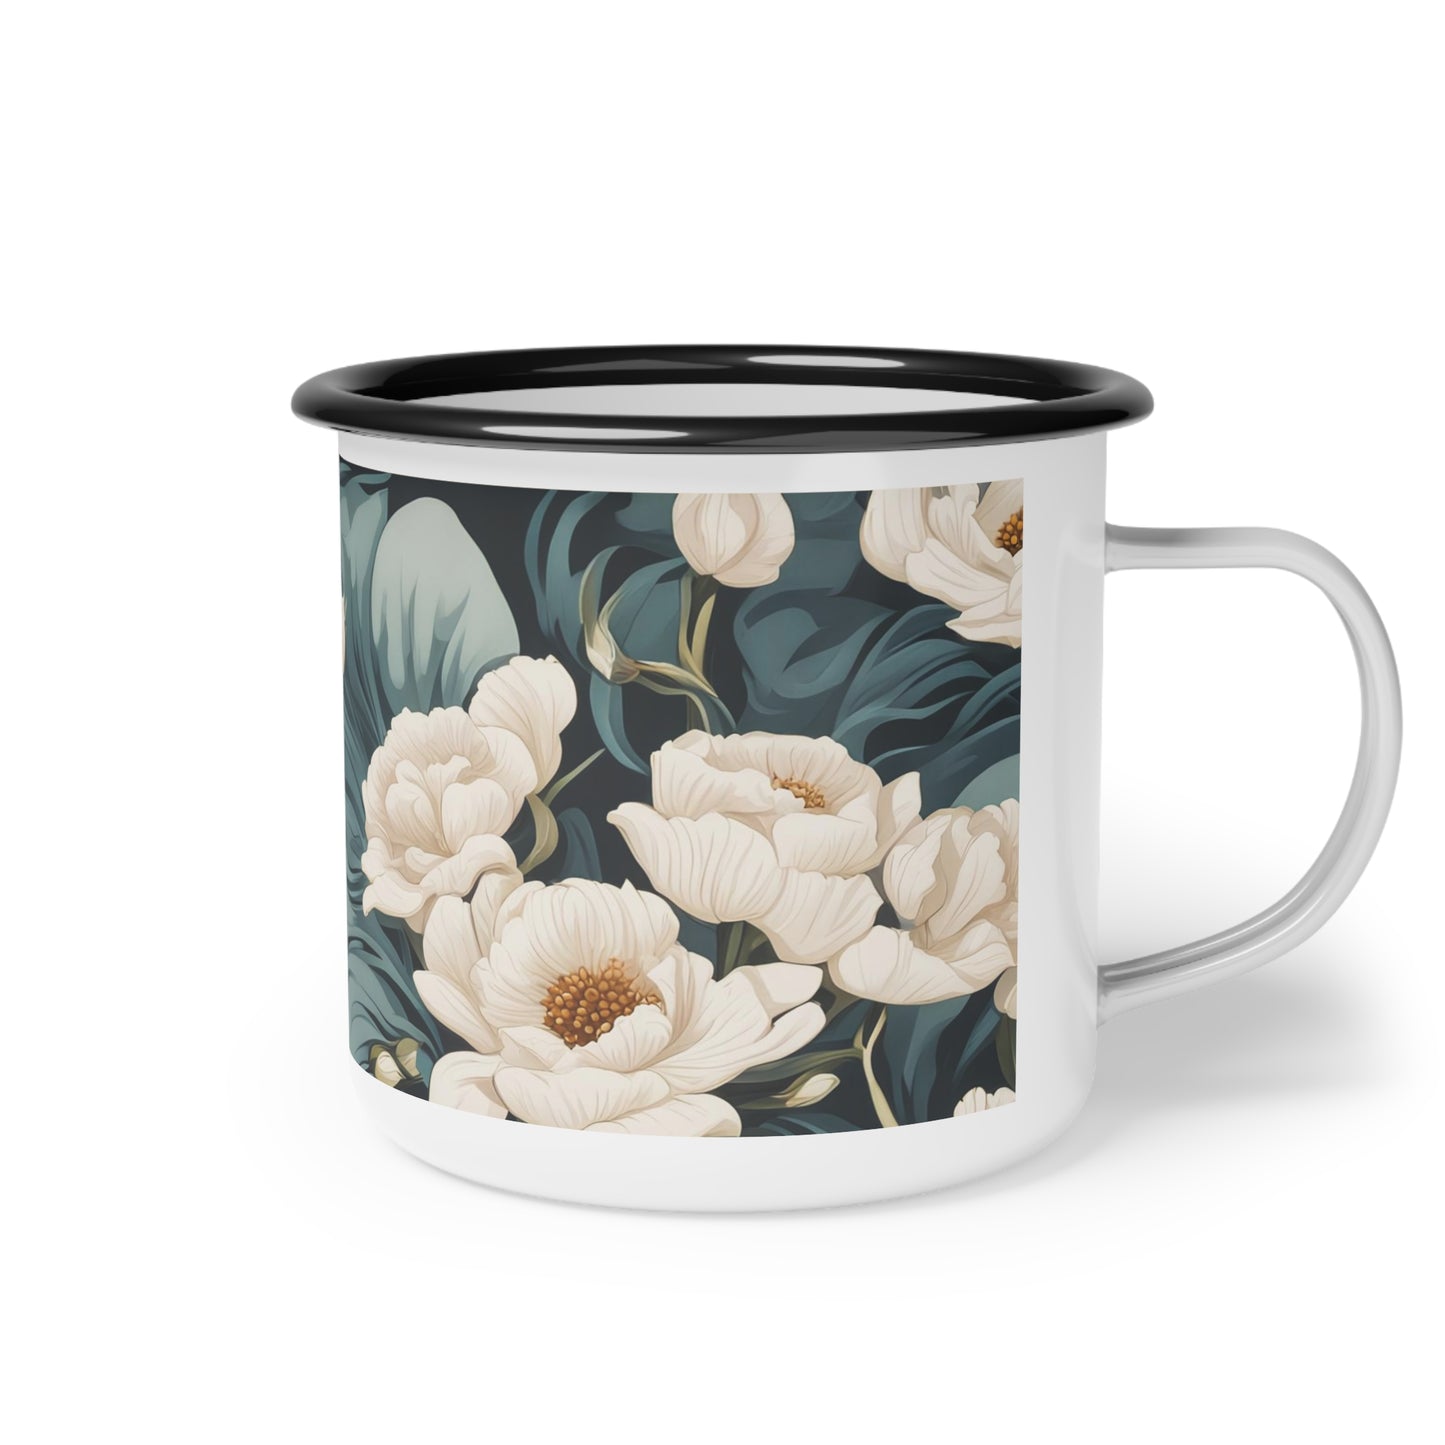 Winter Flowers, Enamel Camping Mug for Coffee, Tea, Cocoa, or Cereal - 12oz